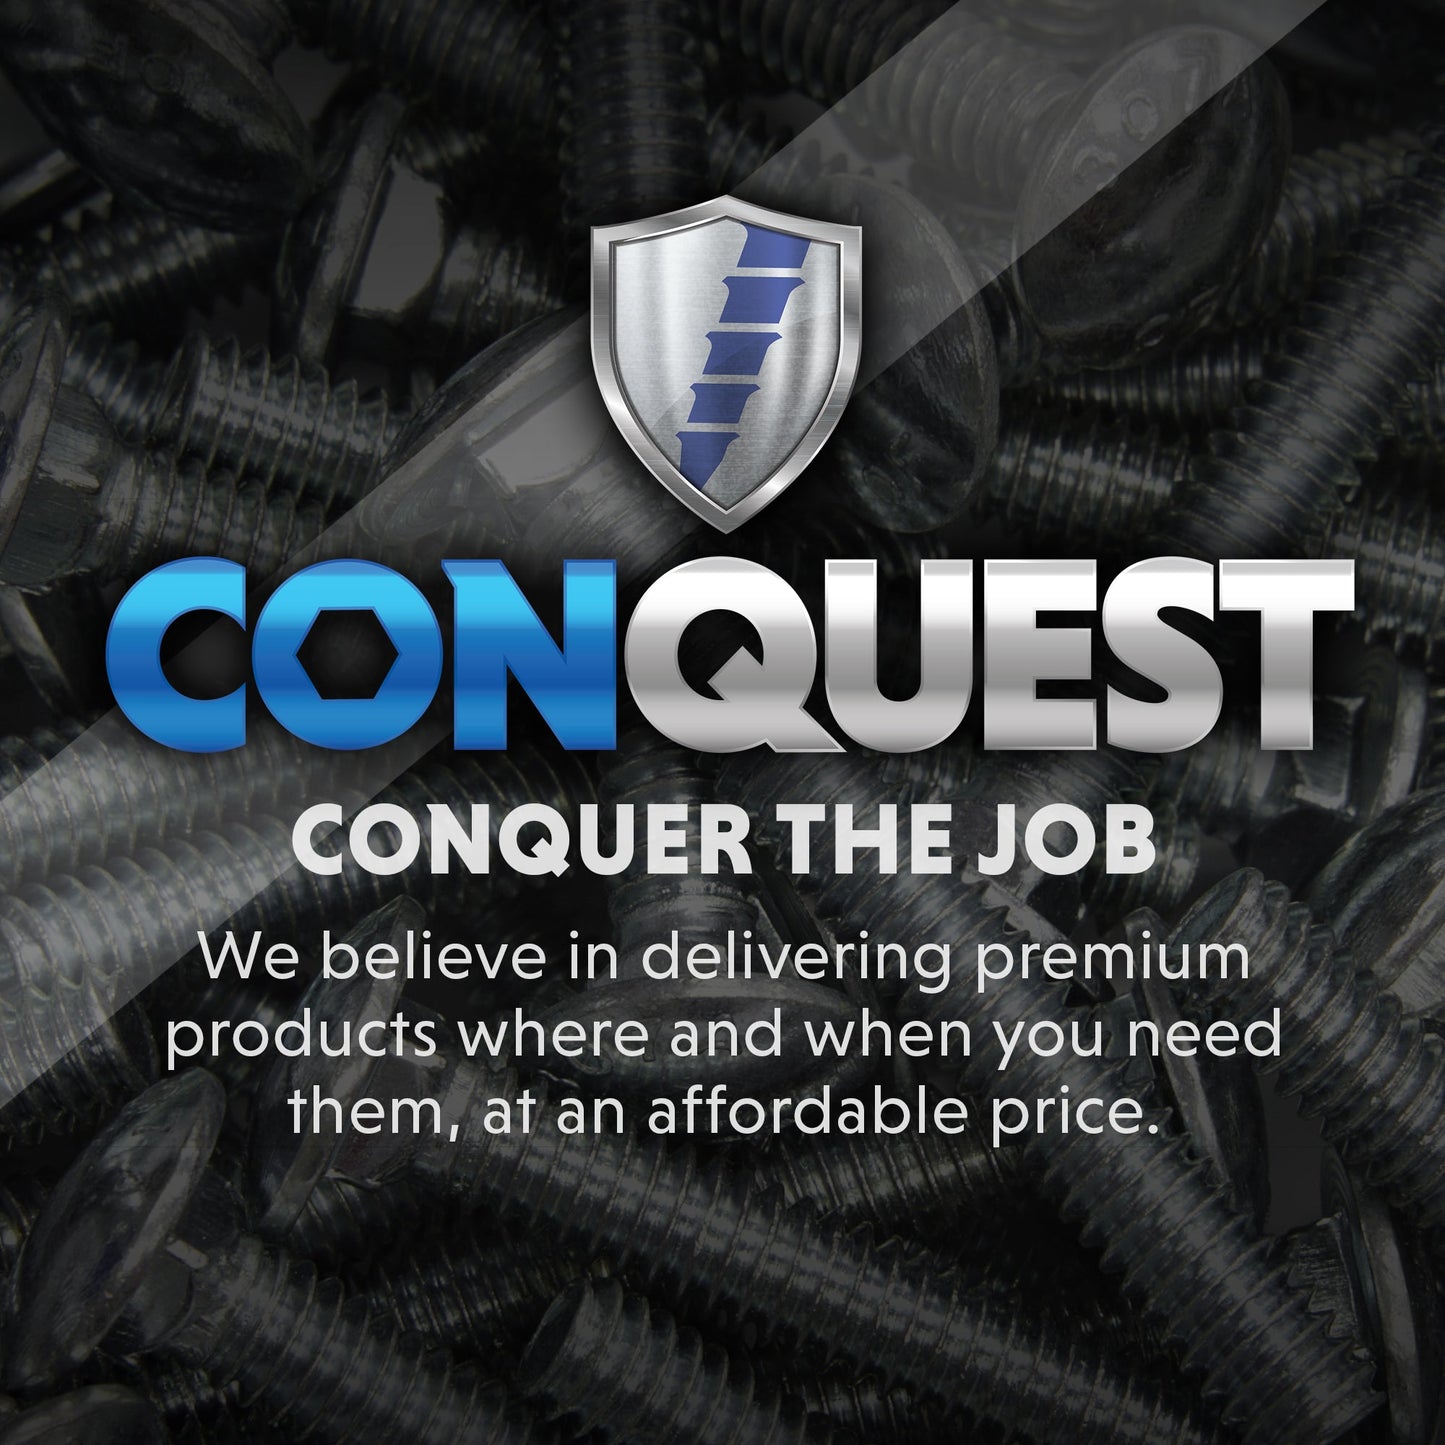 Conquer the Job with Conquest Fasteners - a Premium Brand Trusted by Professionals